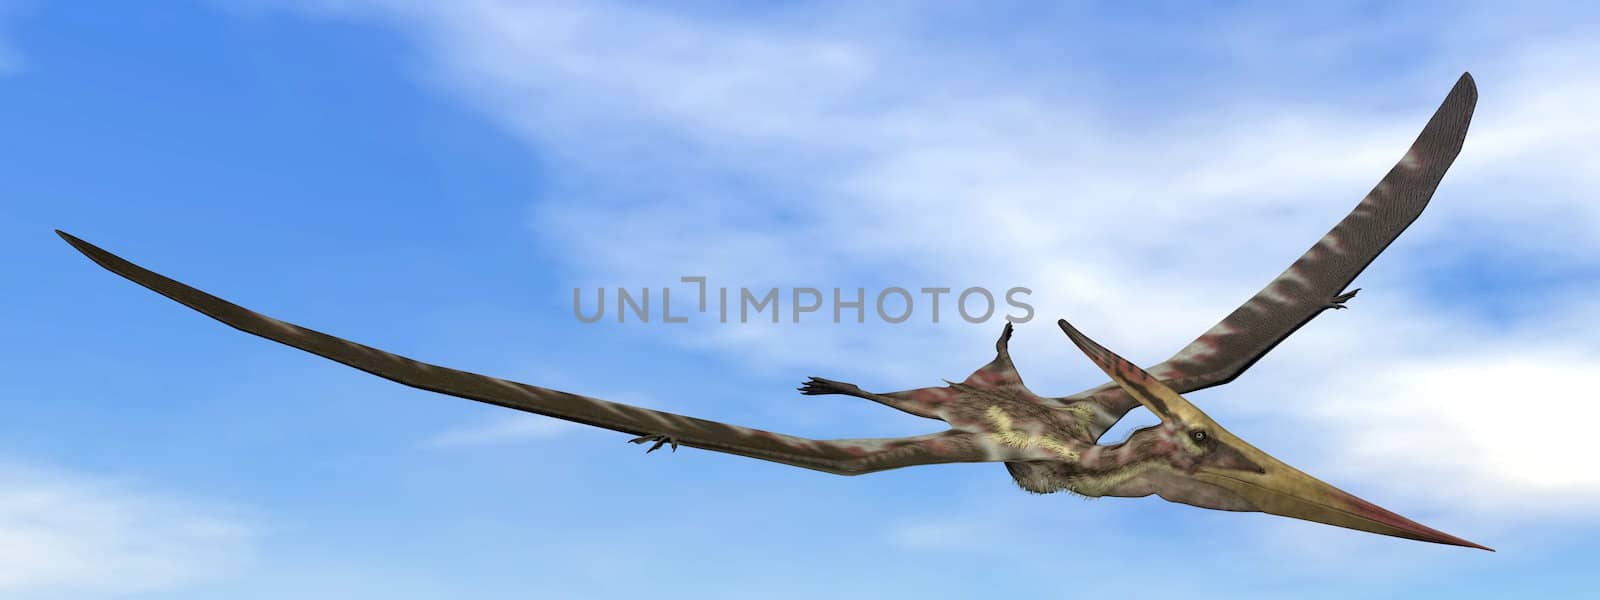 Pteranodon dinosaur flying in the blue sky with little clouds - 3D render